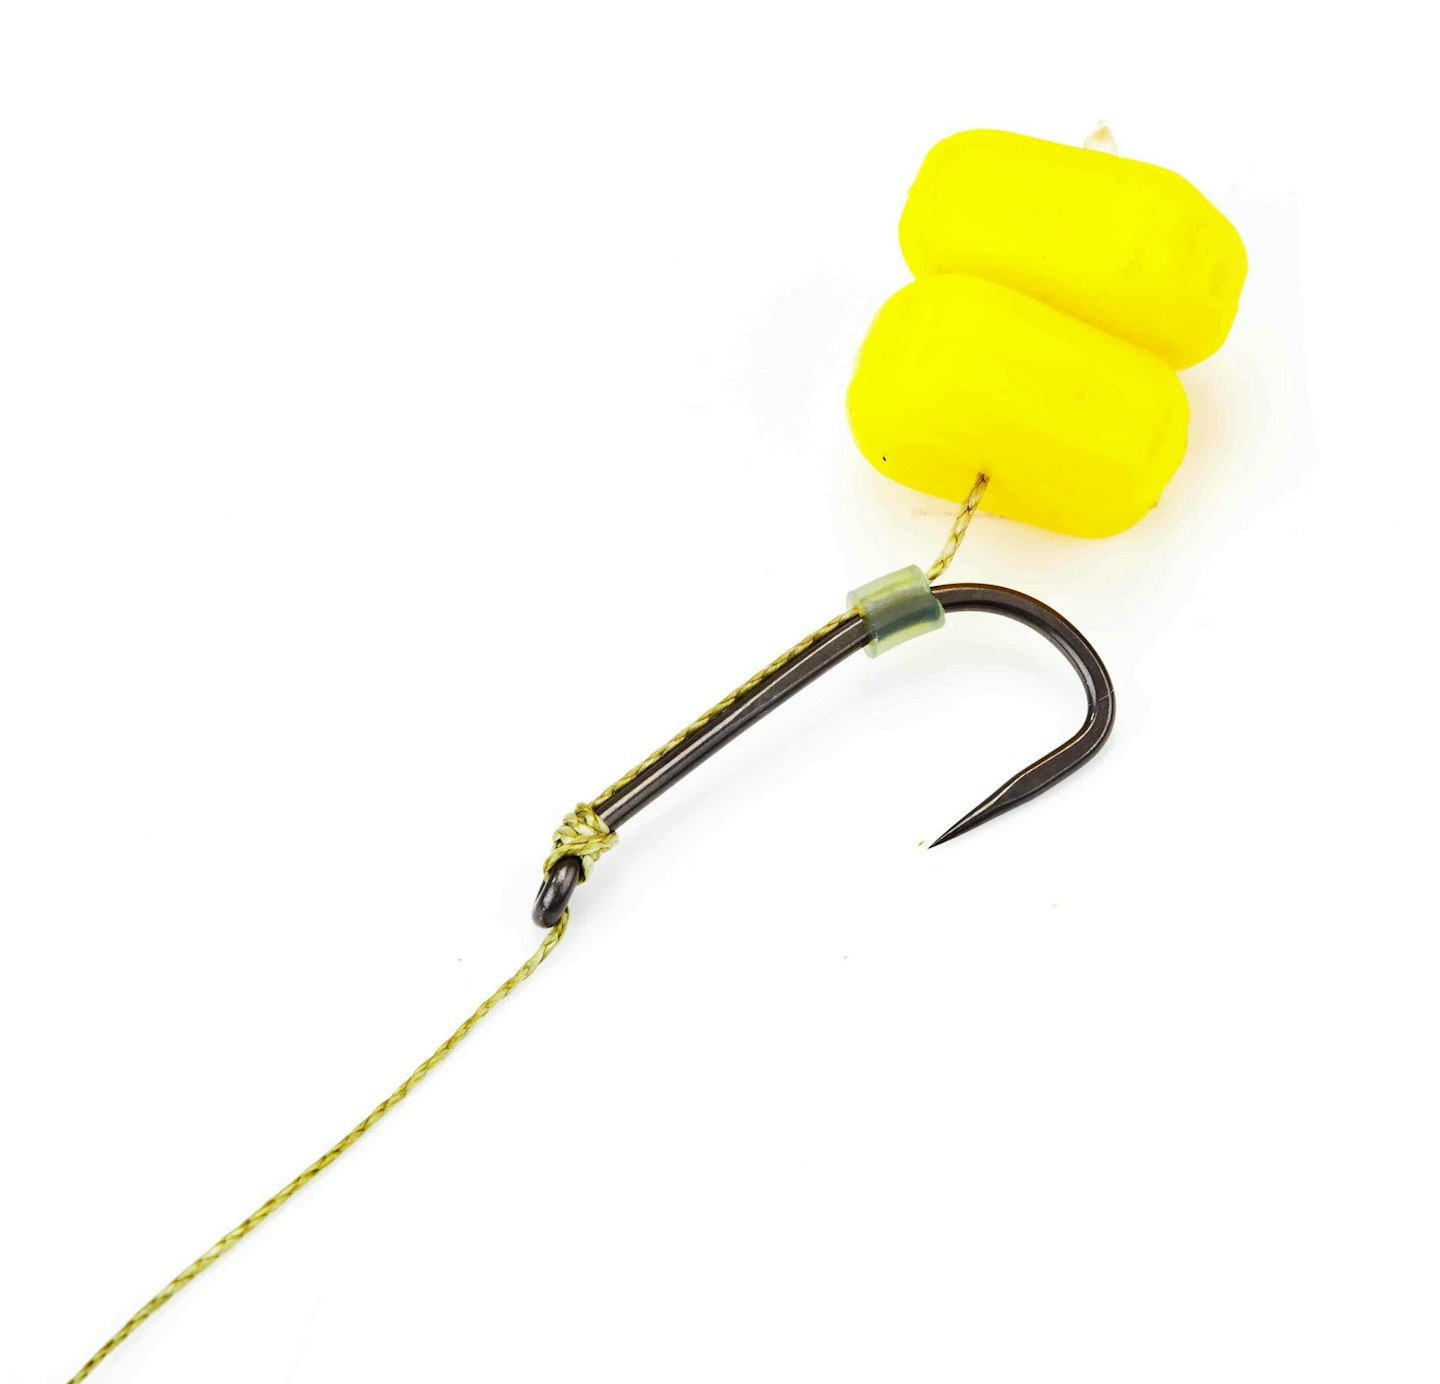 How to attach your hookbaits for carp fishing